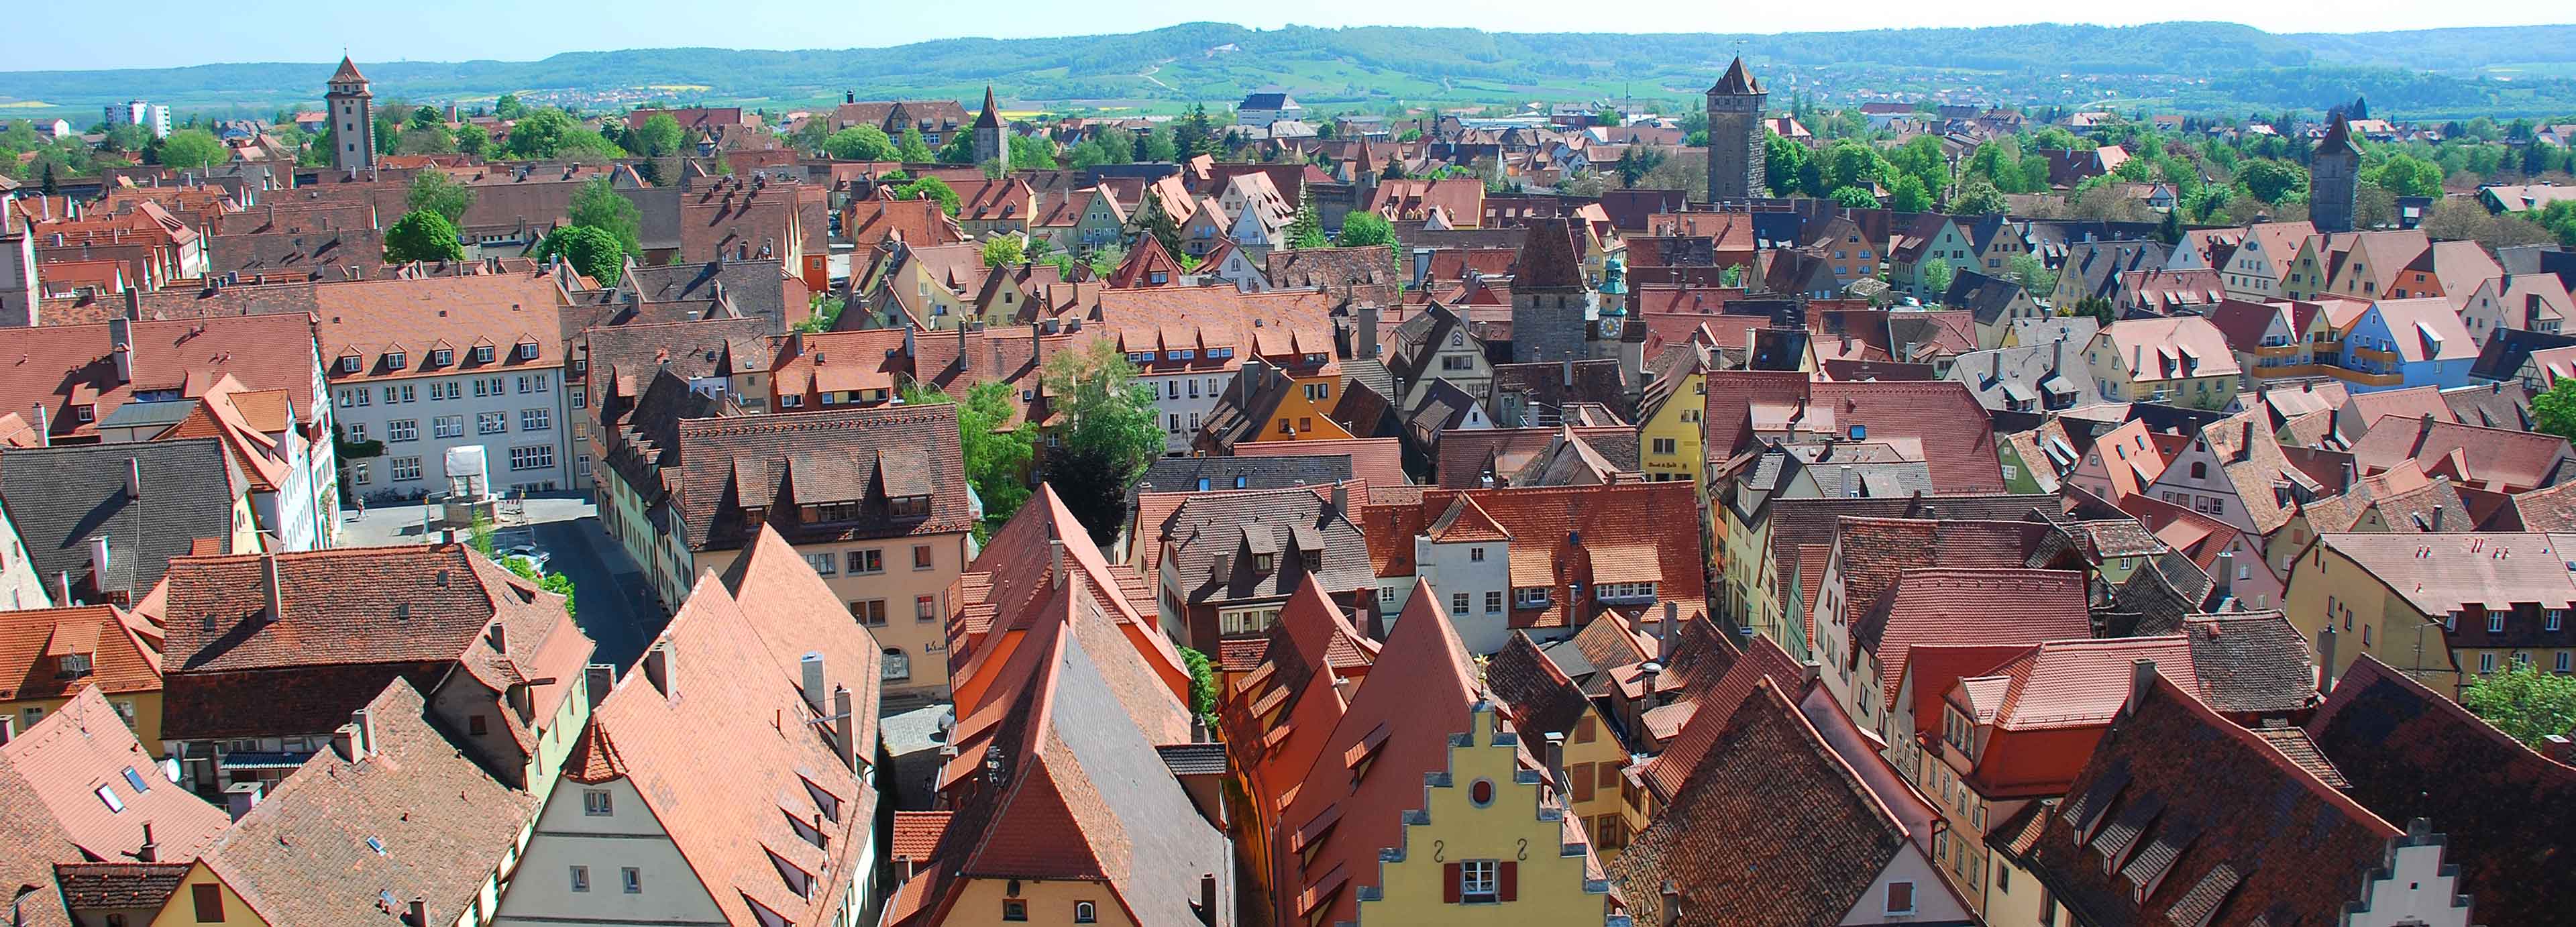 Rothenburg ob der Tauber | Bavarian towns and cities